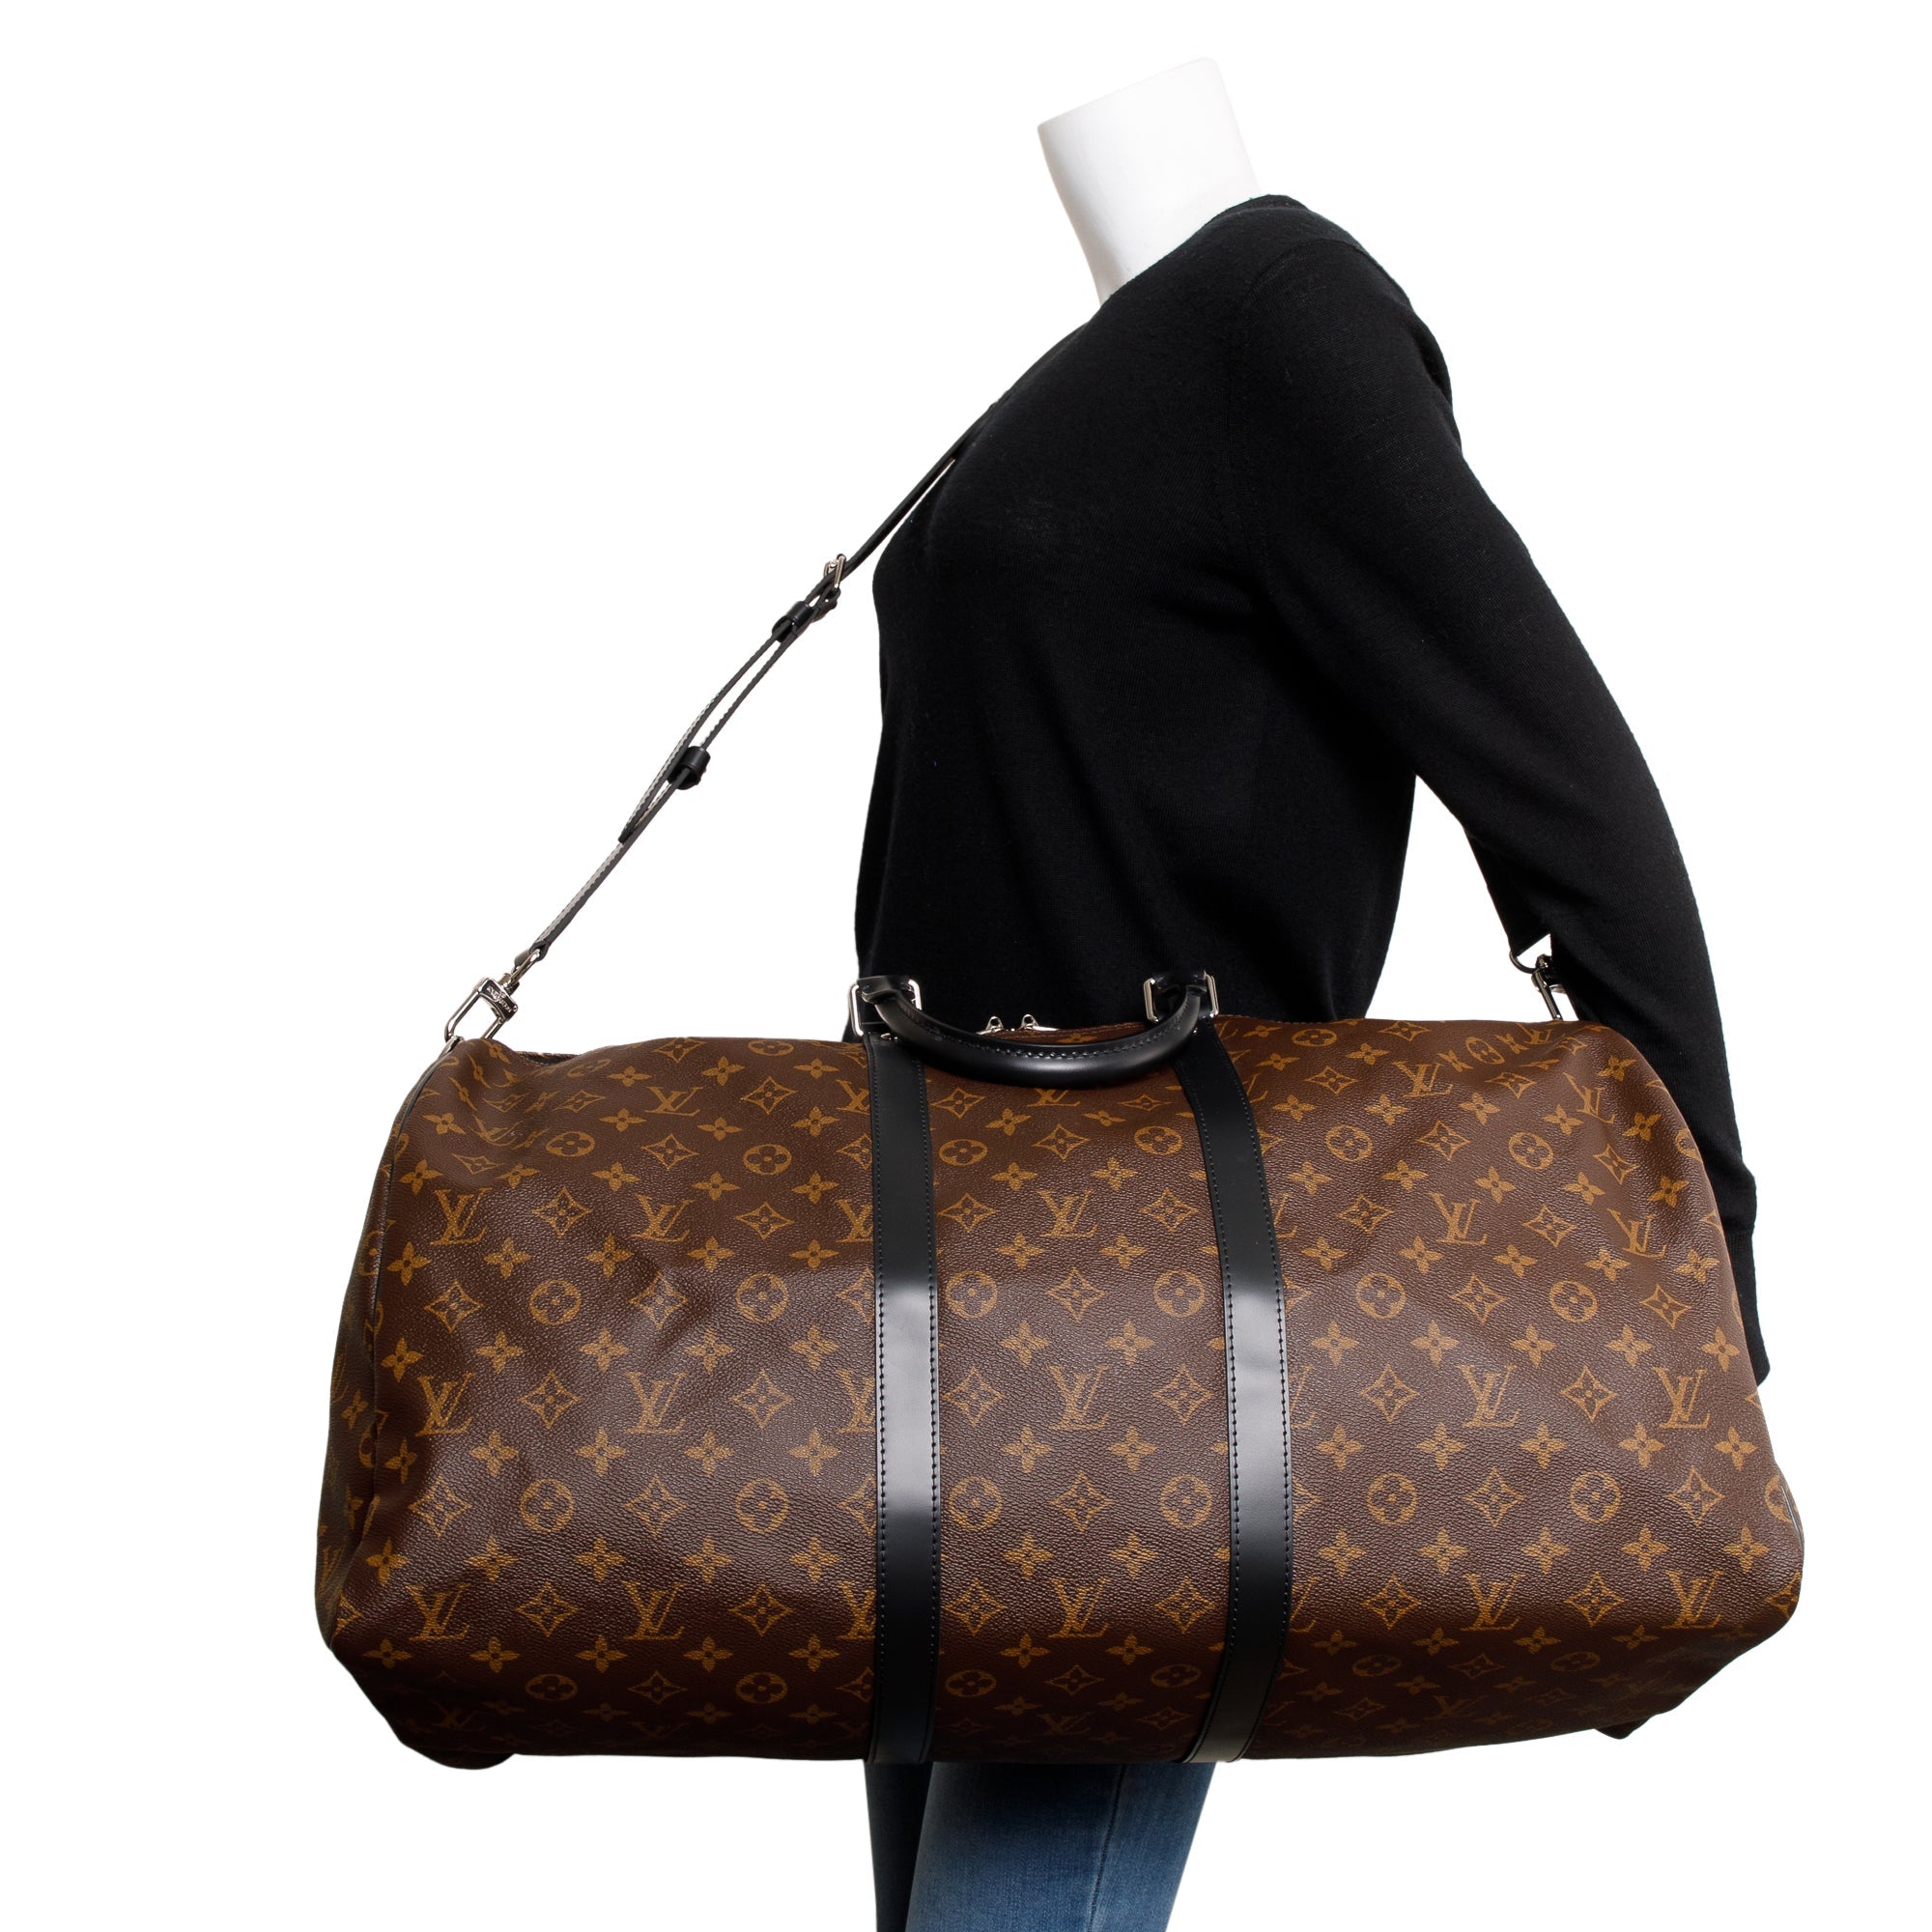 LOUIS VUITTON KEEPALL BANDOULIÈRE 55 REVIEW - Best travel bag or totally  overpriced ? 